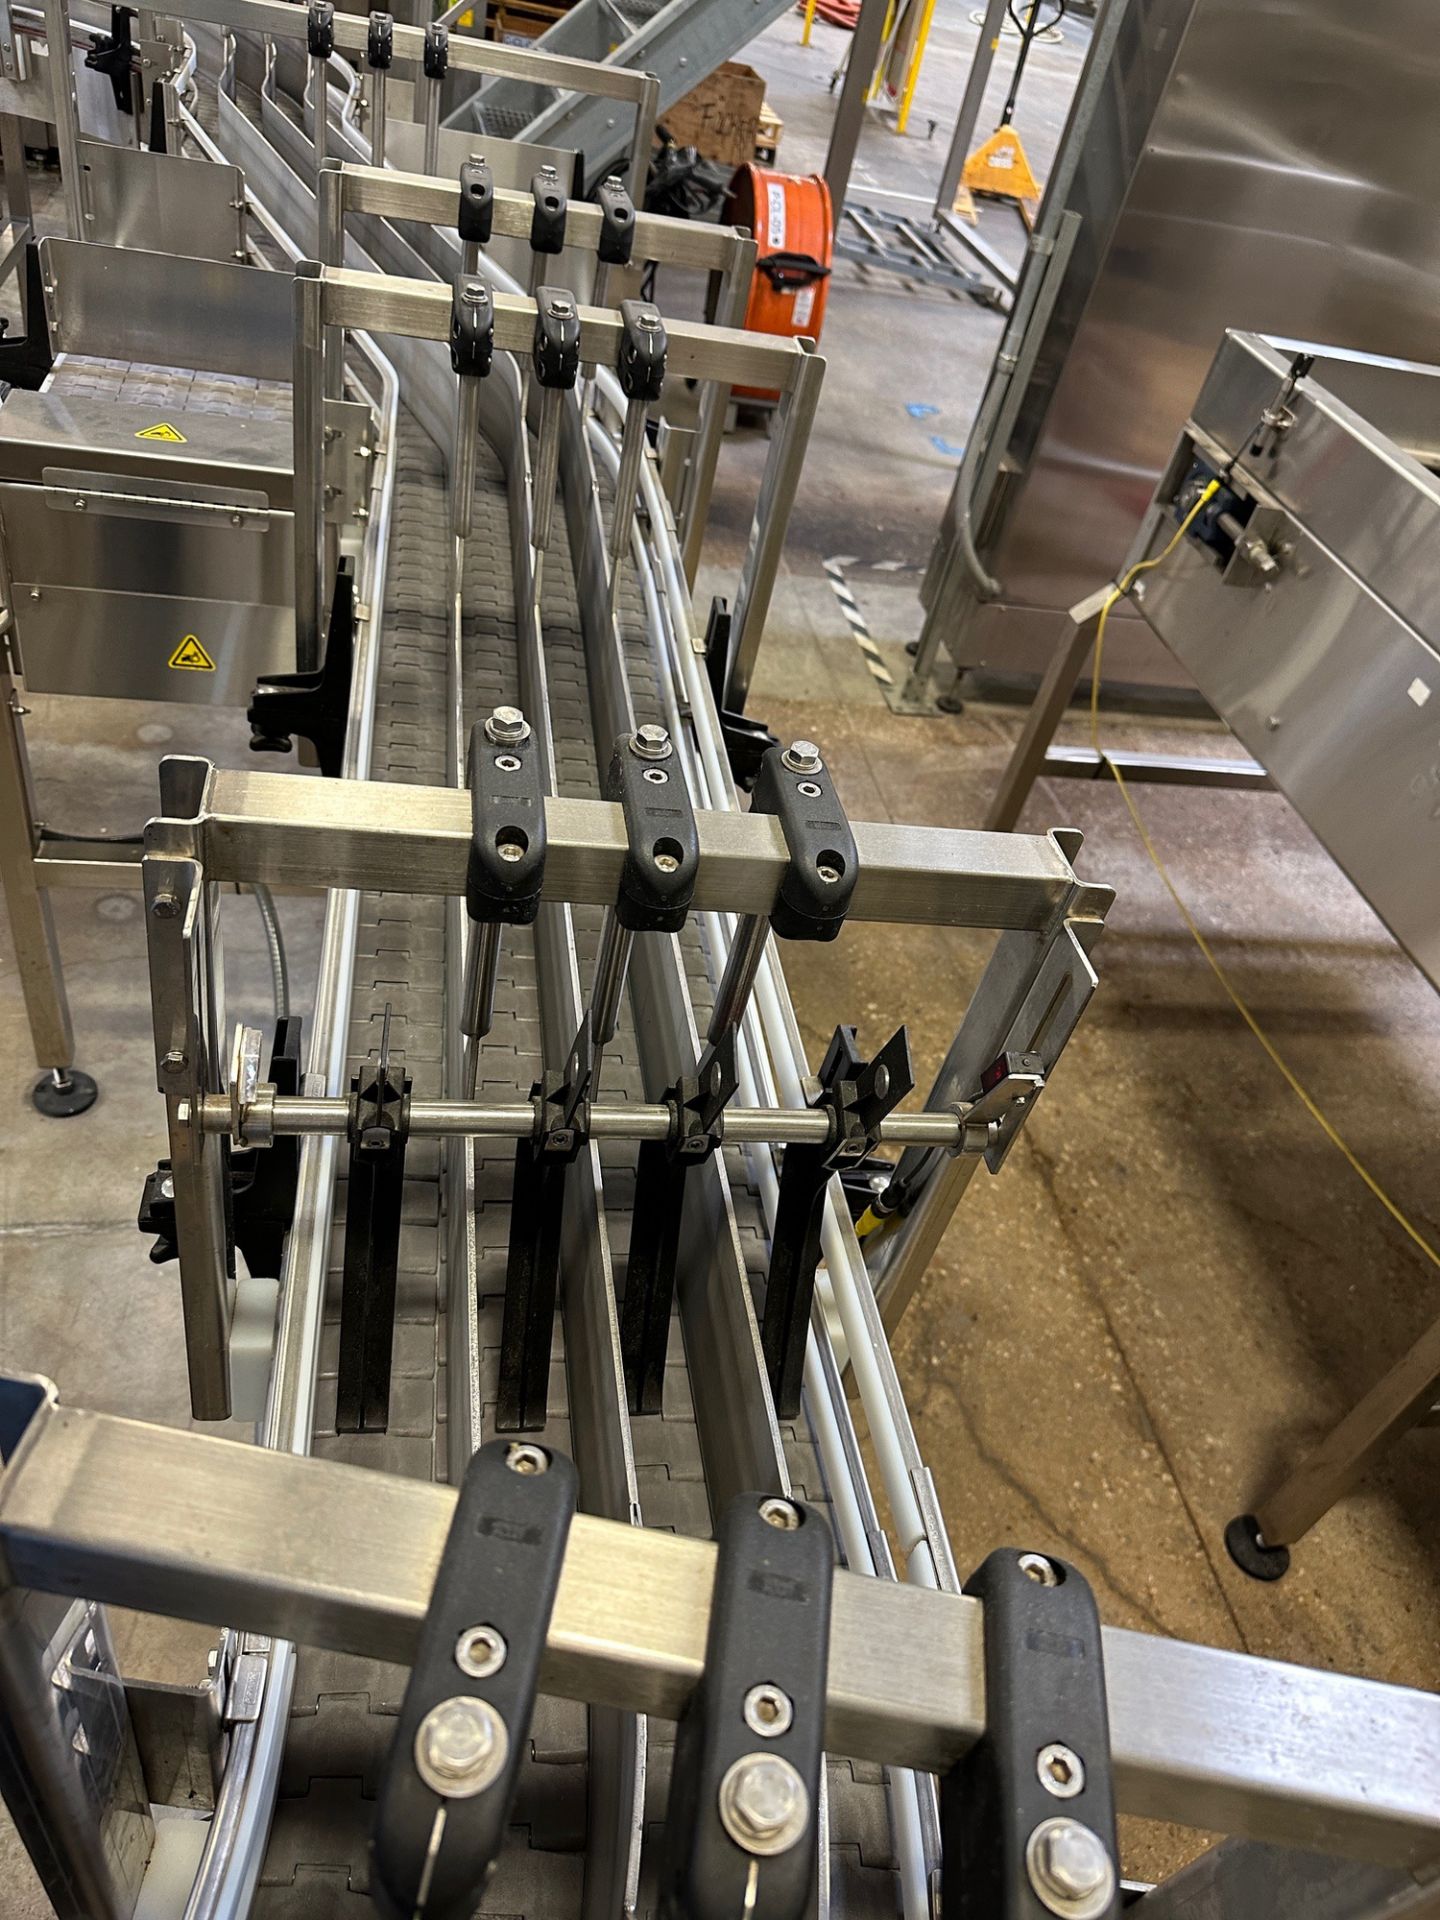 Bevco Conveyor over Stainless Steel Frame (Approx. (4) 3.25" Belts x 16' with 90 Degree Turn) - Image 2 of 4